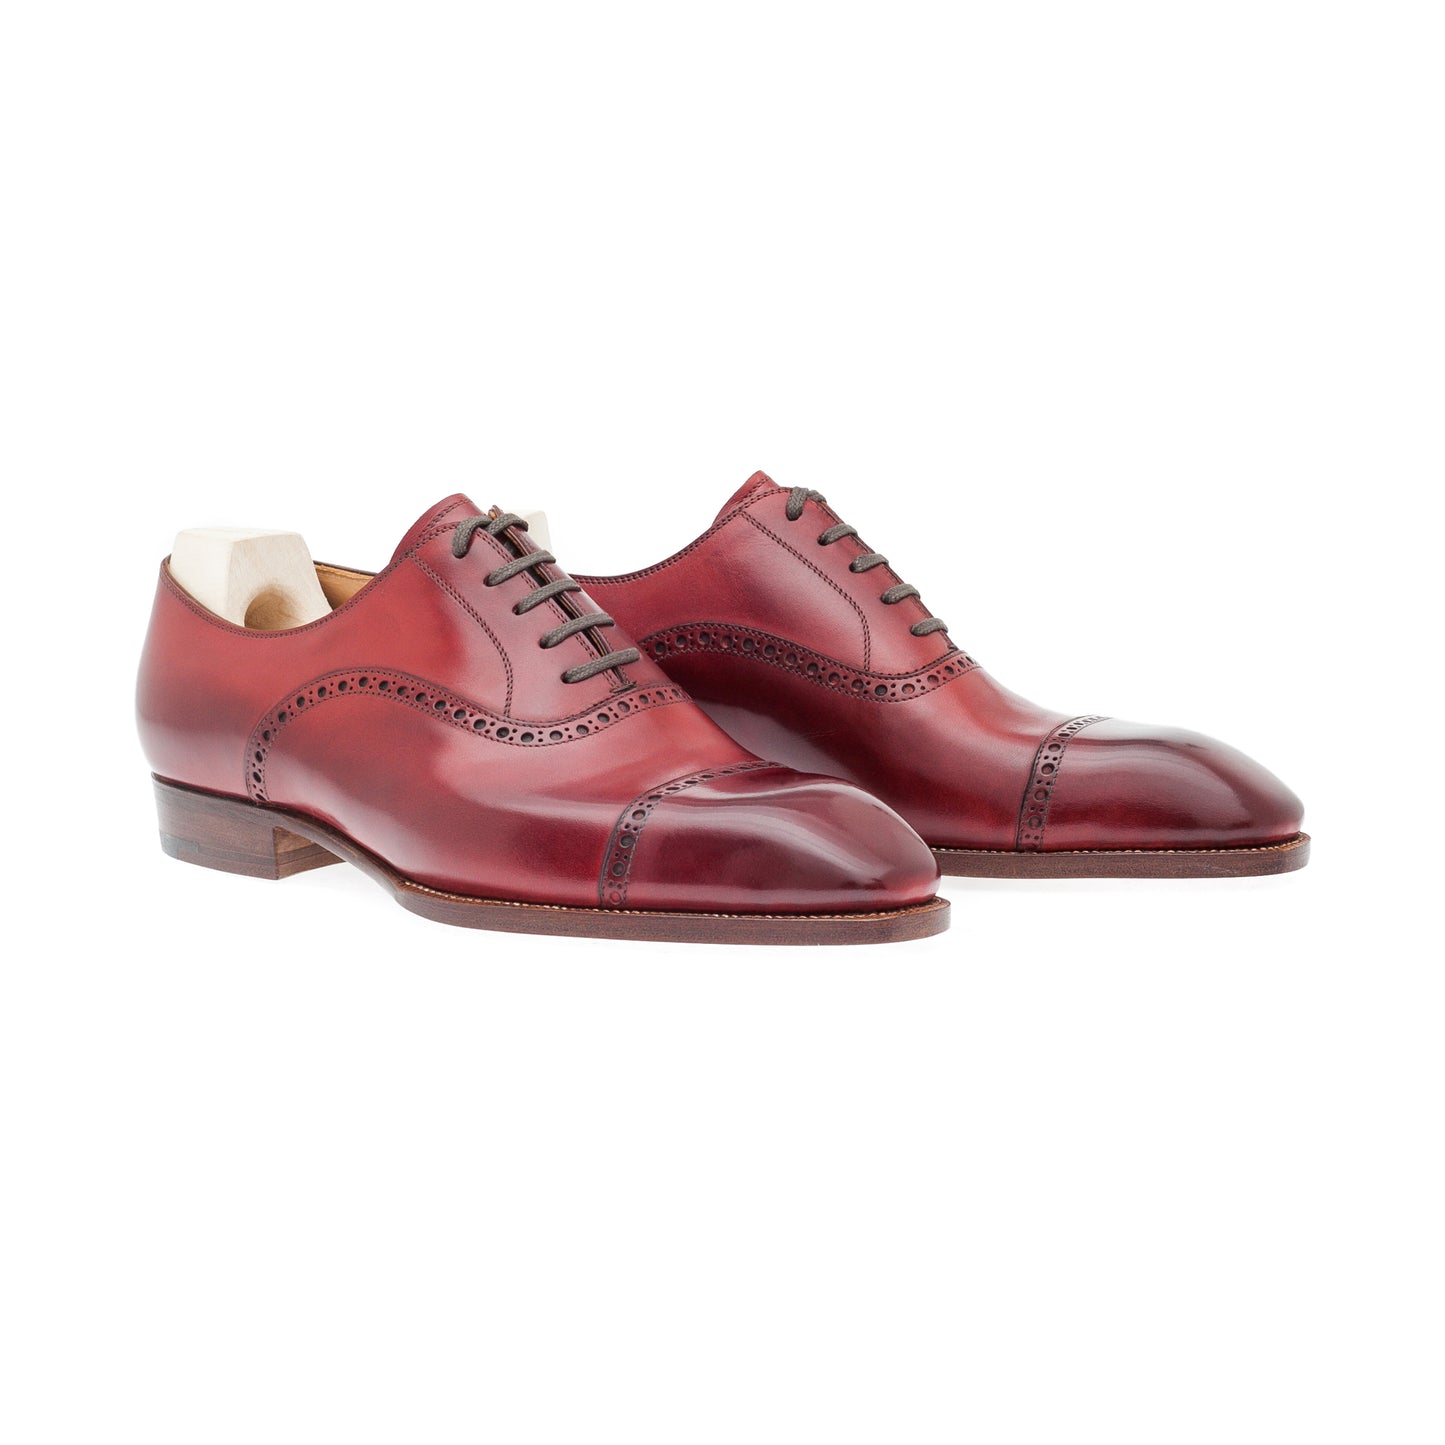 Oxford with brogueing on the straight toe cap and counter